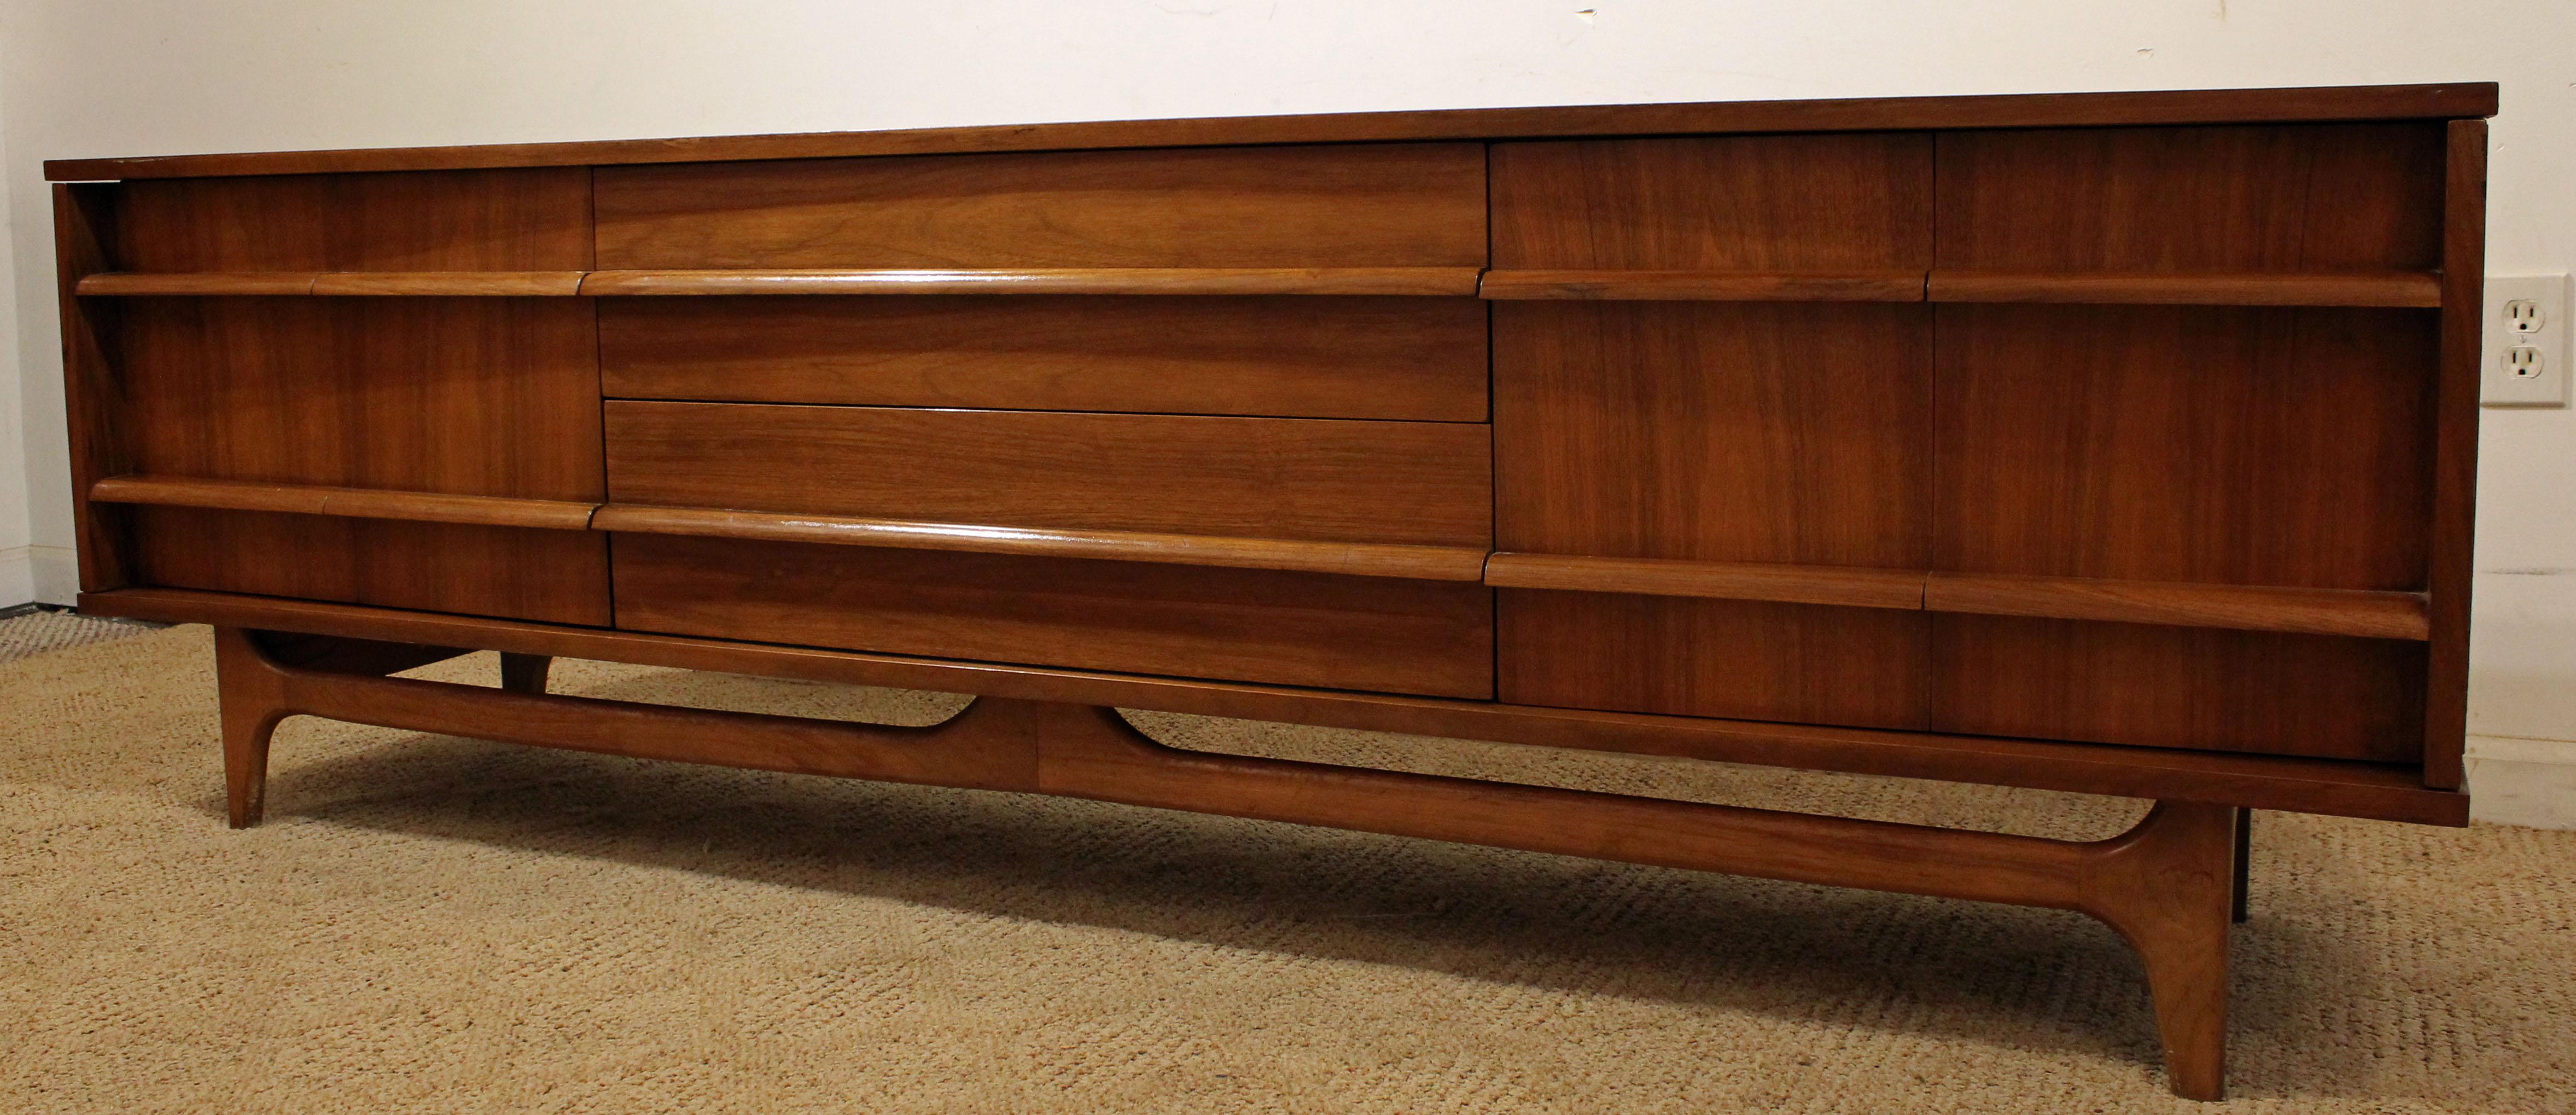 American Mid-Century Modern Elongated Low Concave-Front Walnut Credenza